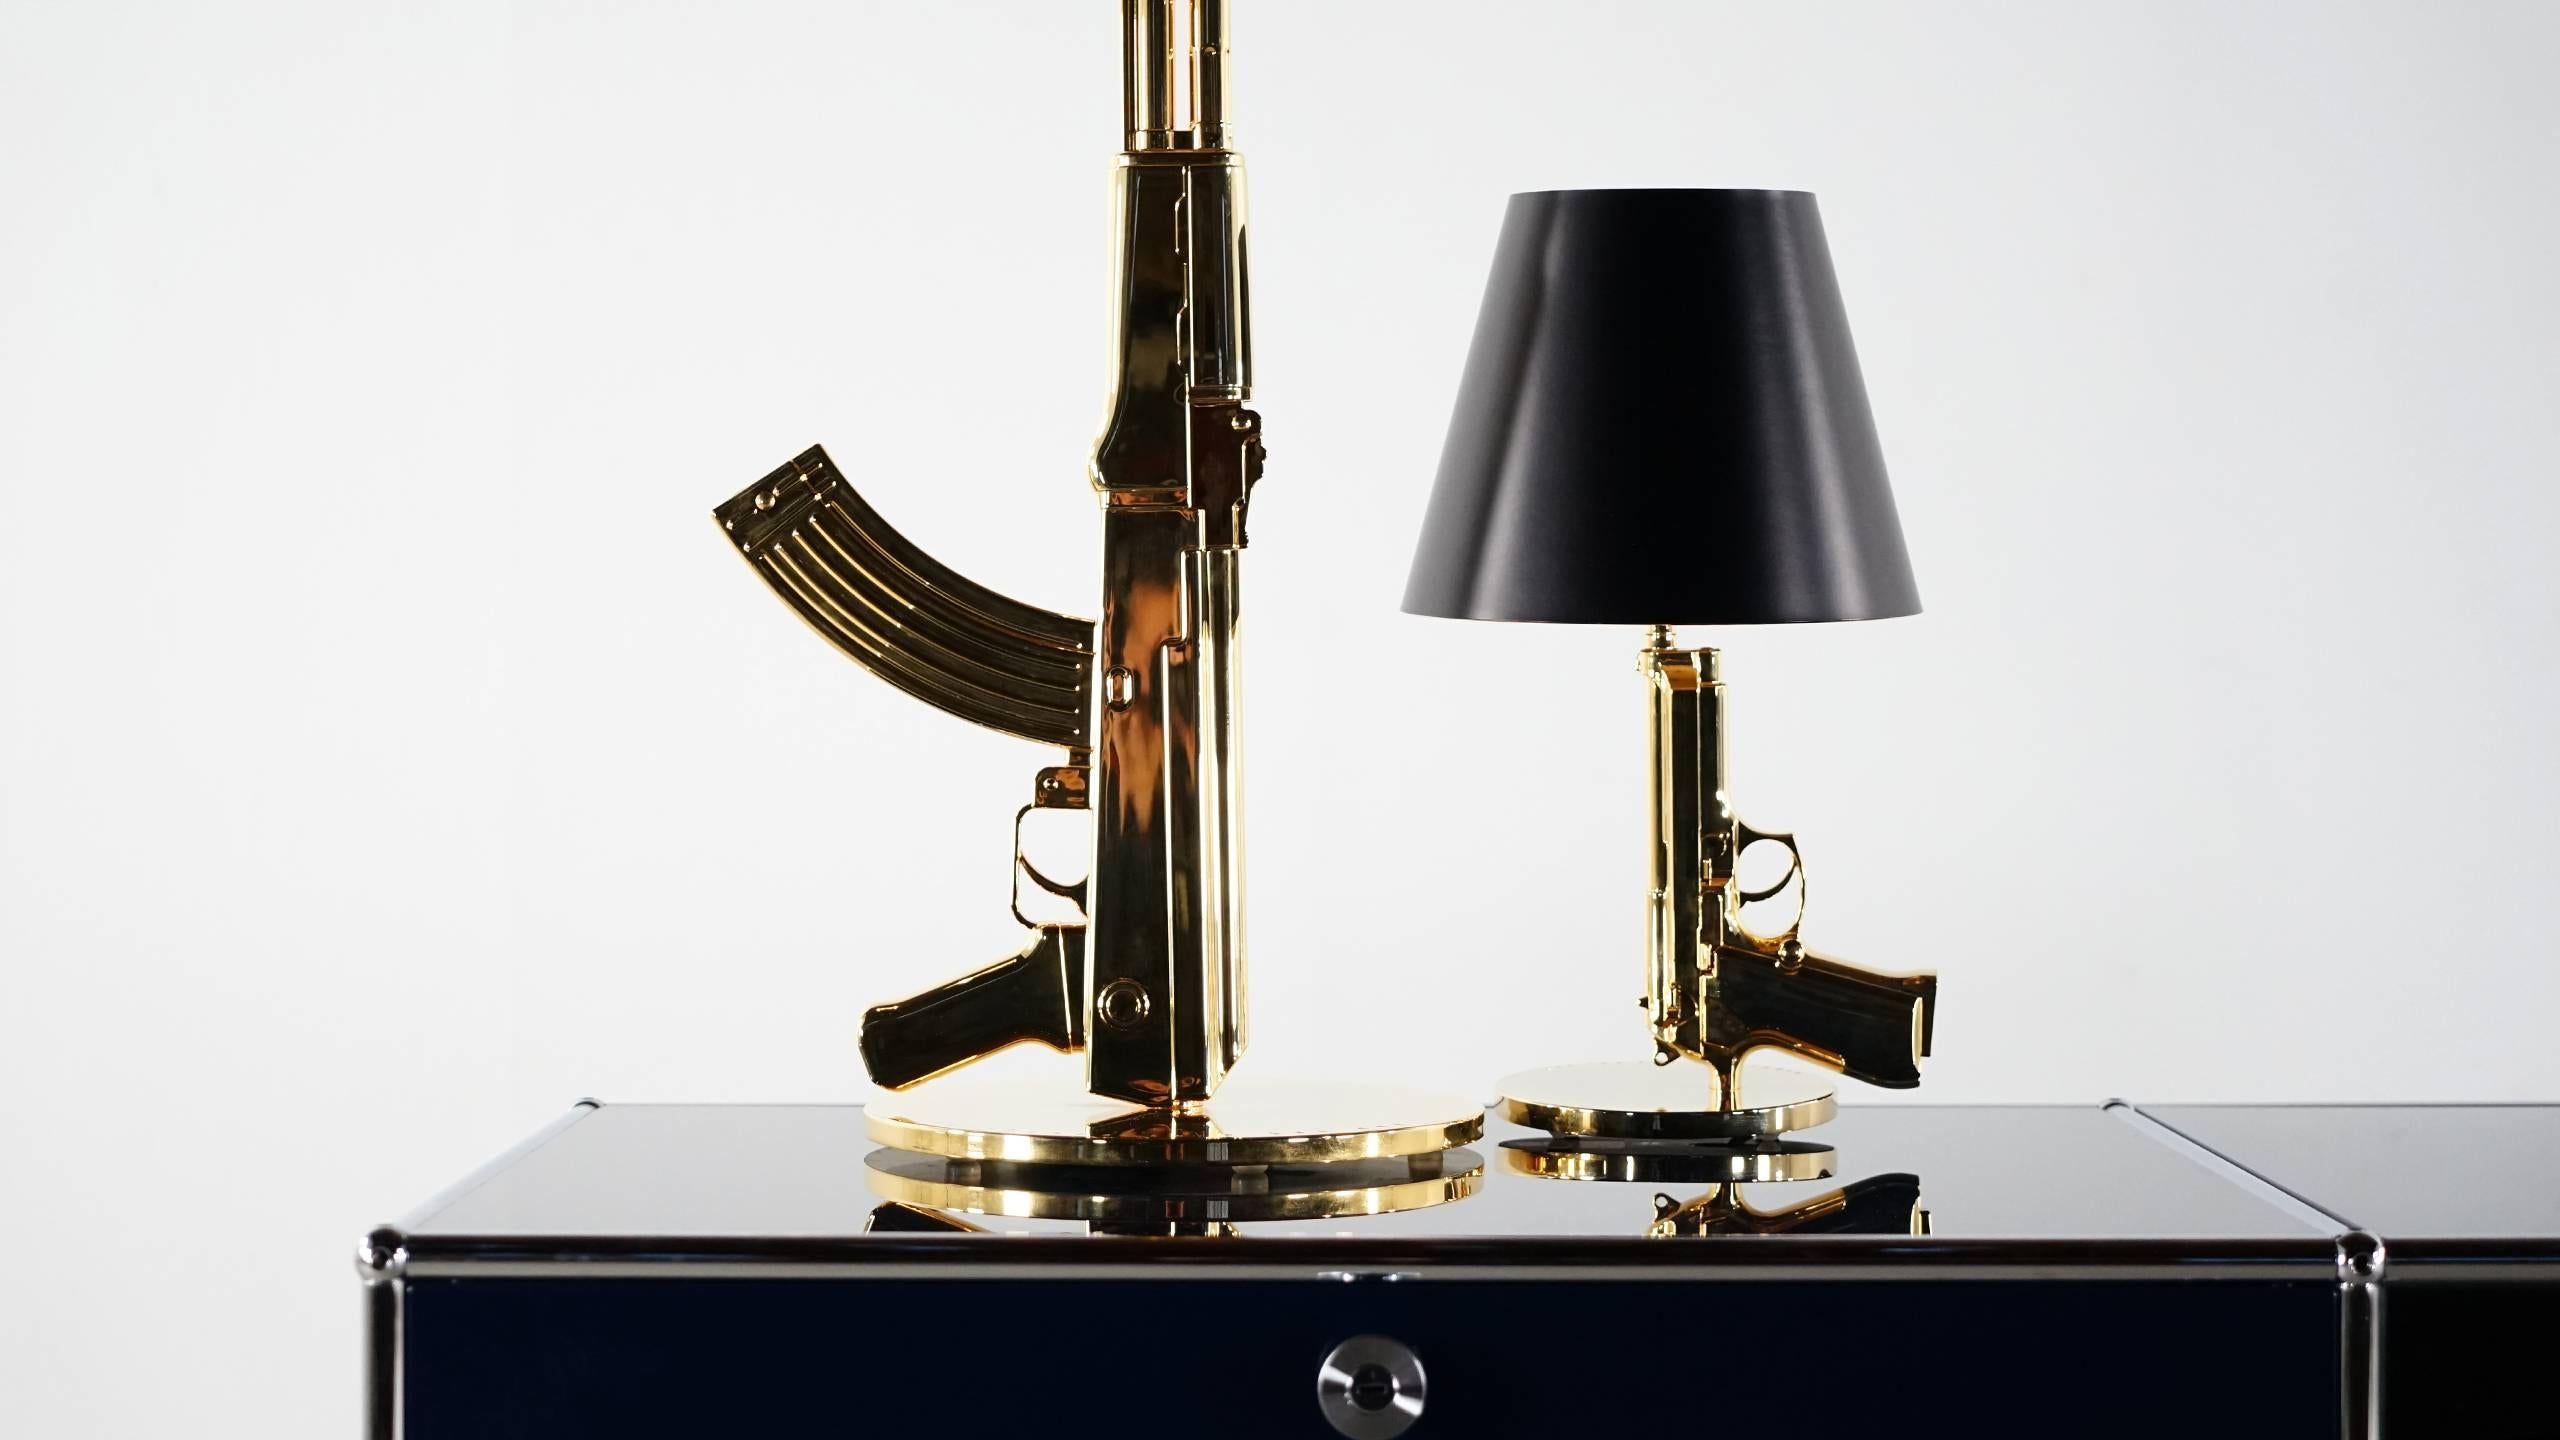 Here you go for a legendary lamp by Philippe Starck for Flos.
in aluminium with 18-karat gold cover. Perfect condition!

the offer is for the Bedside gun, which measures about 42.6cm high, the AK47 table gun is sold..
Flos - label underneath.

This